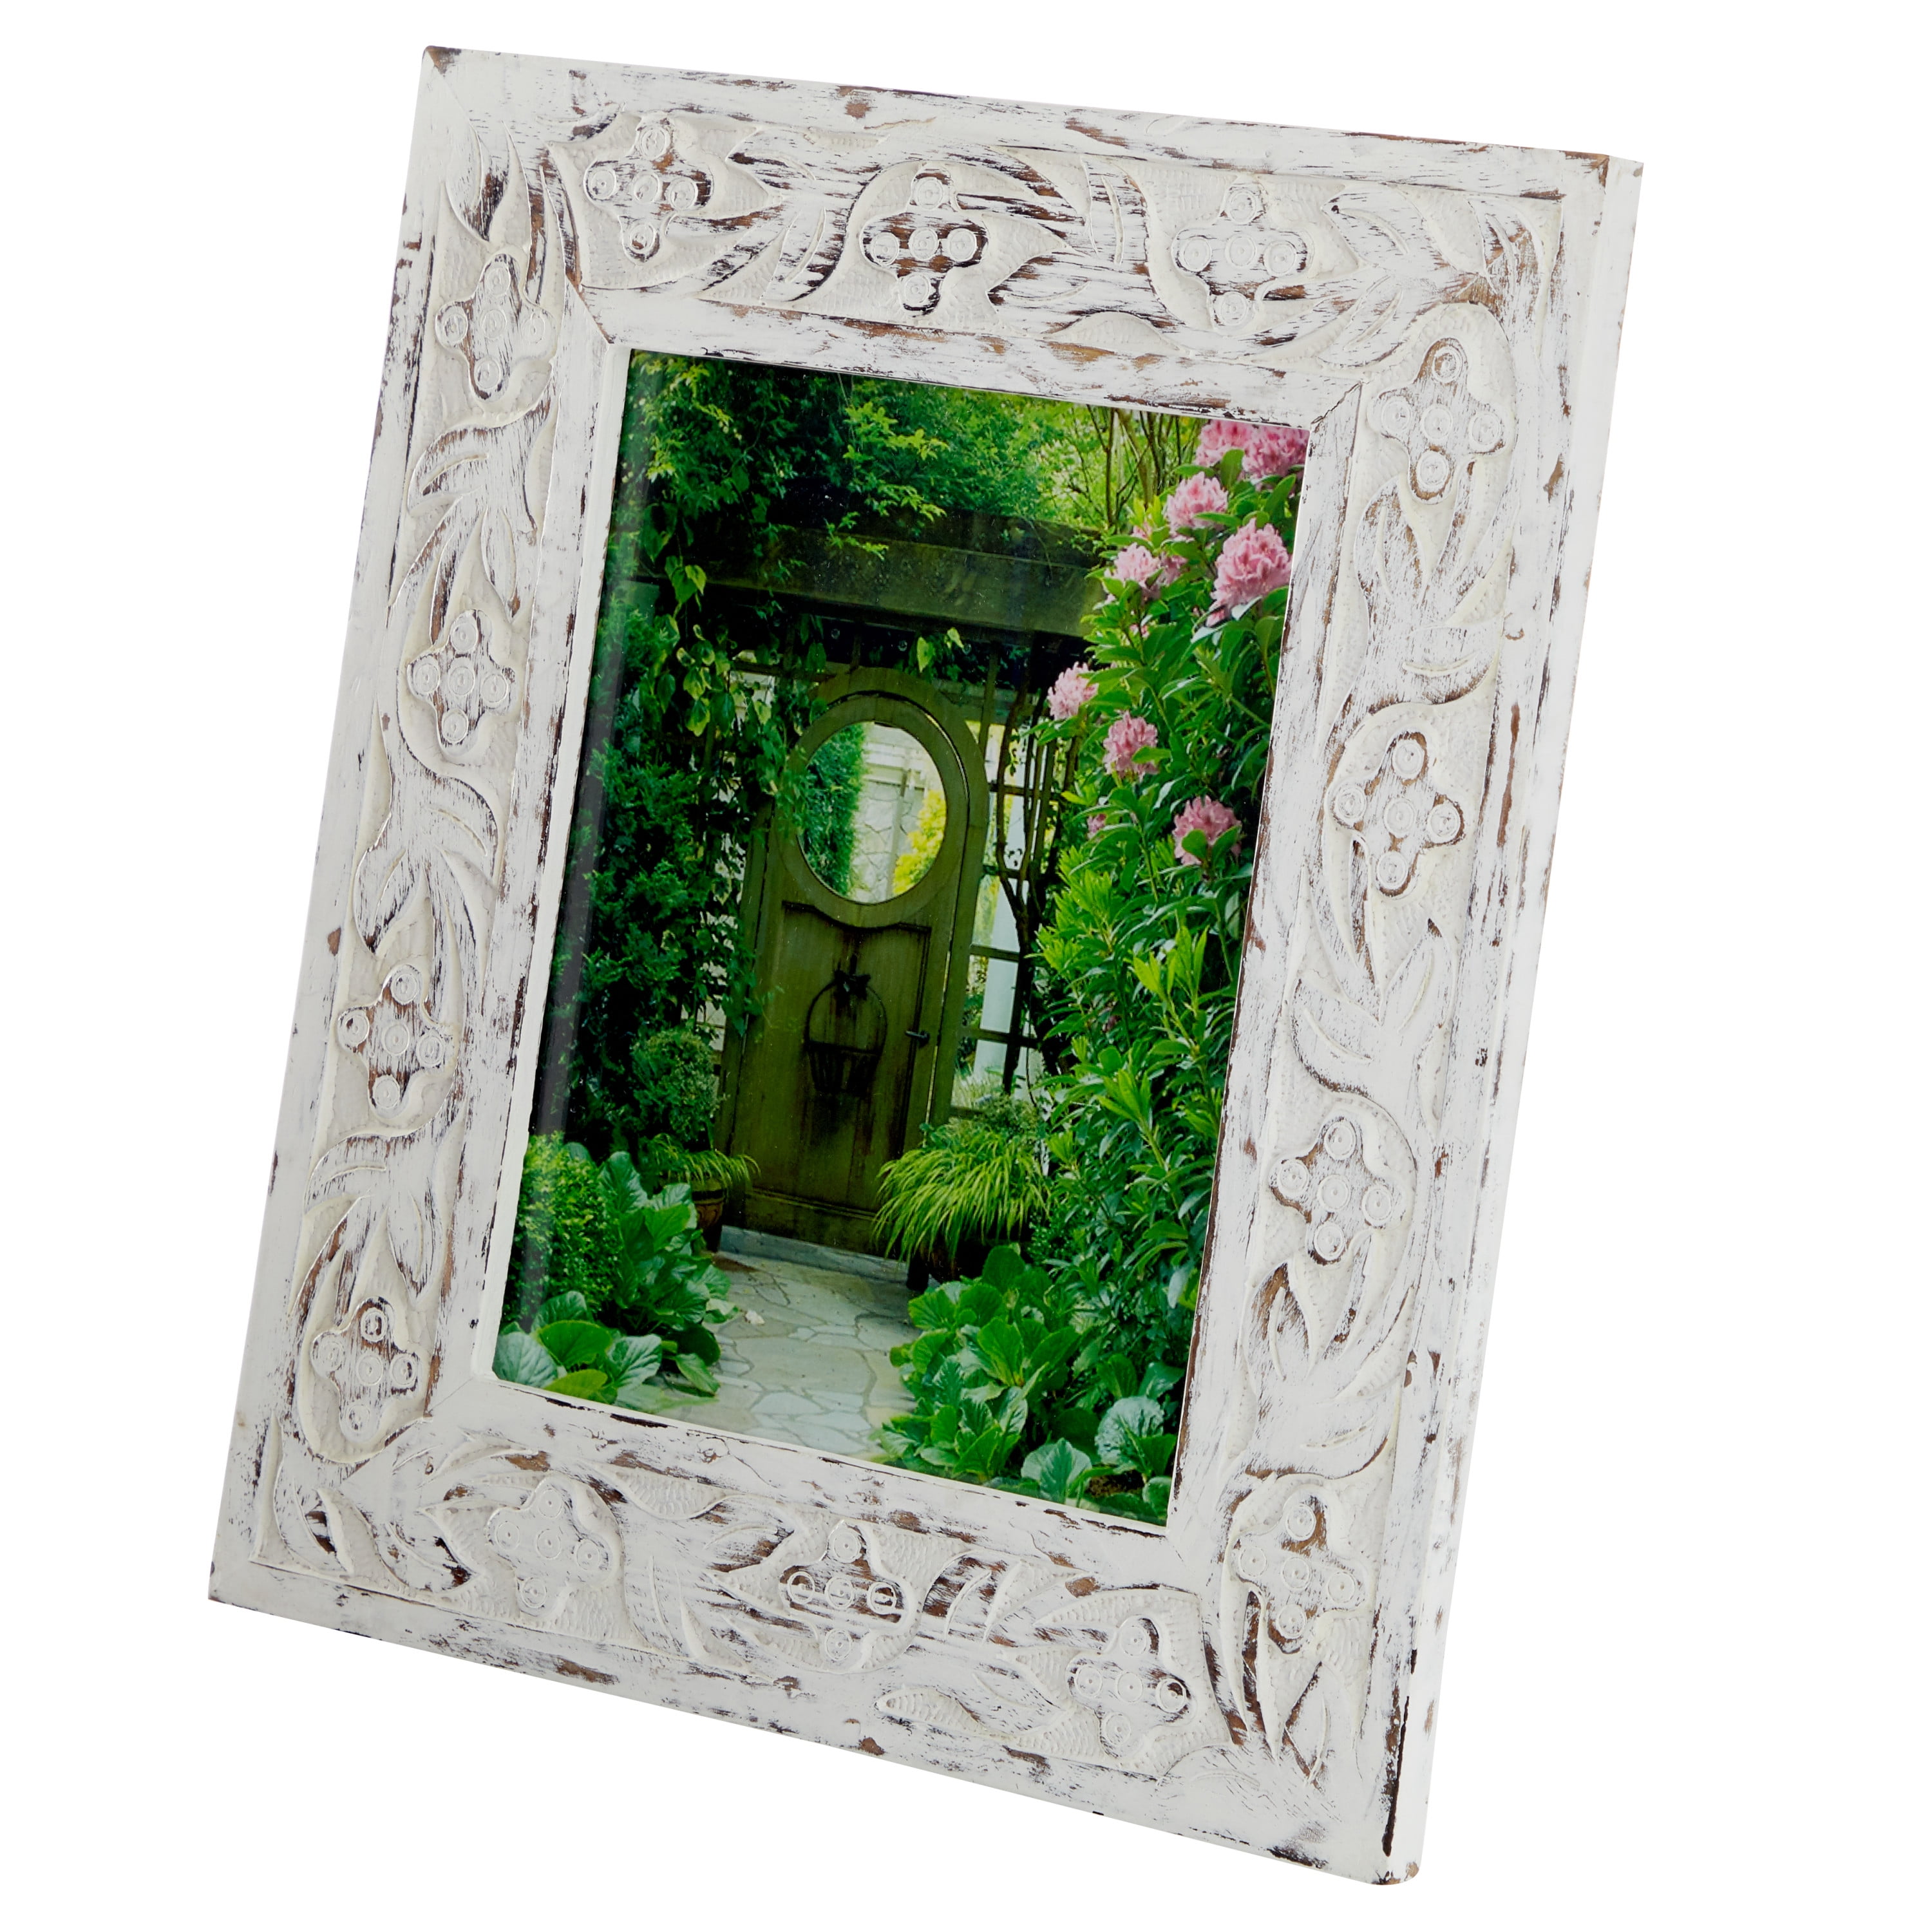 Carved Floral Wooden Photo Frame 4x6 Picture Frame 8x10 Picture Frame  Rustic Antique Frame Handcrafted Photo Frames New Baby Gift 